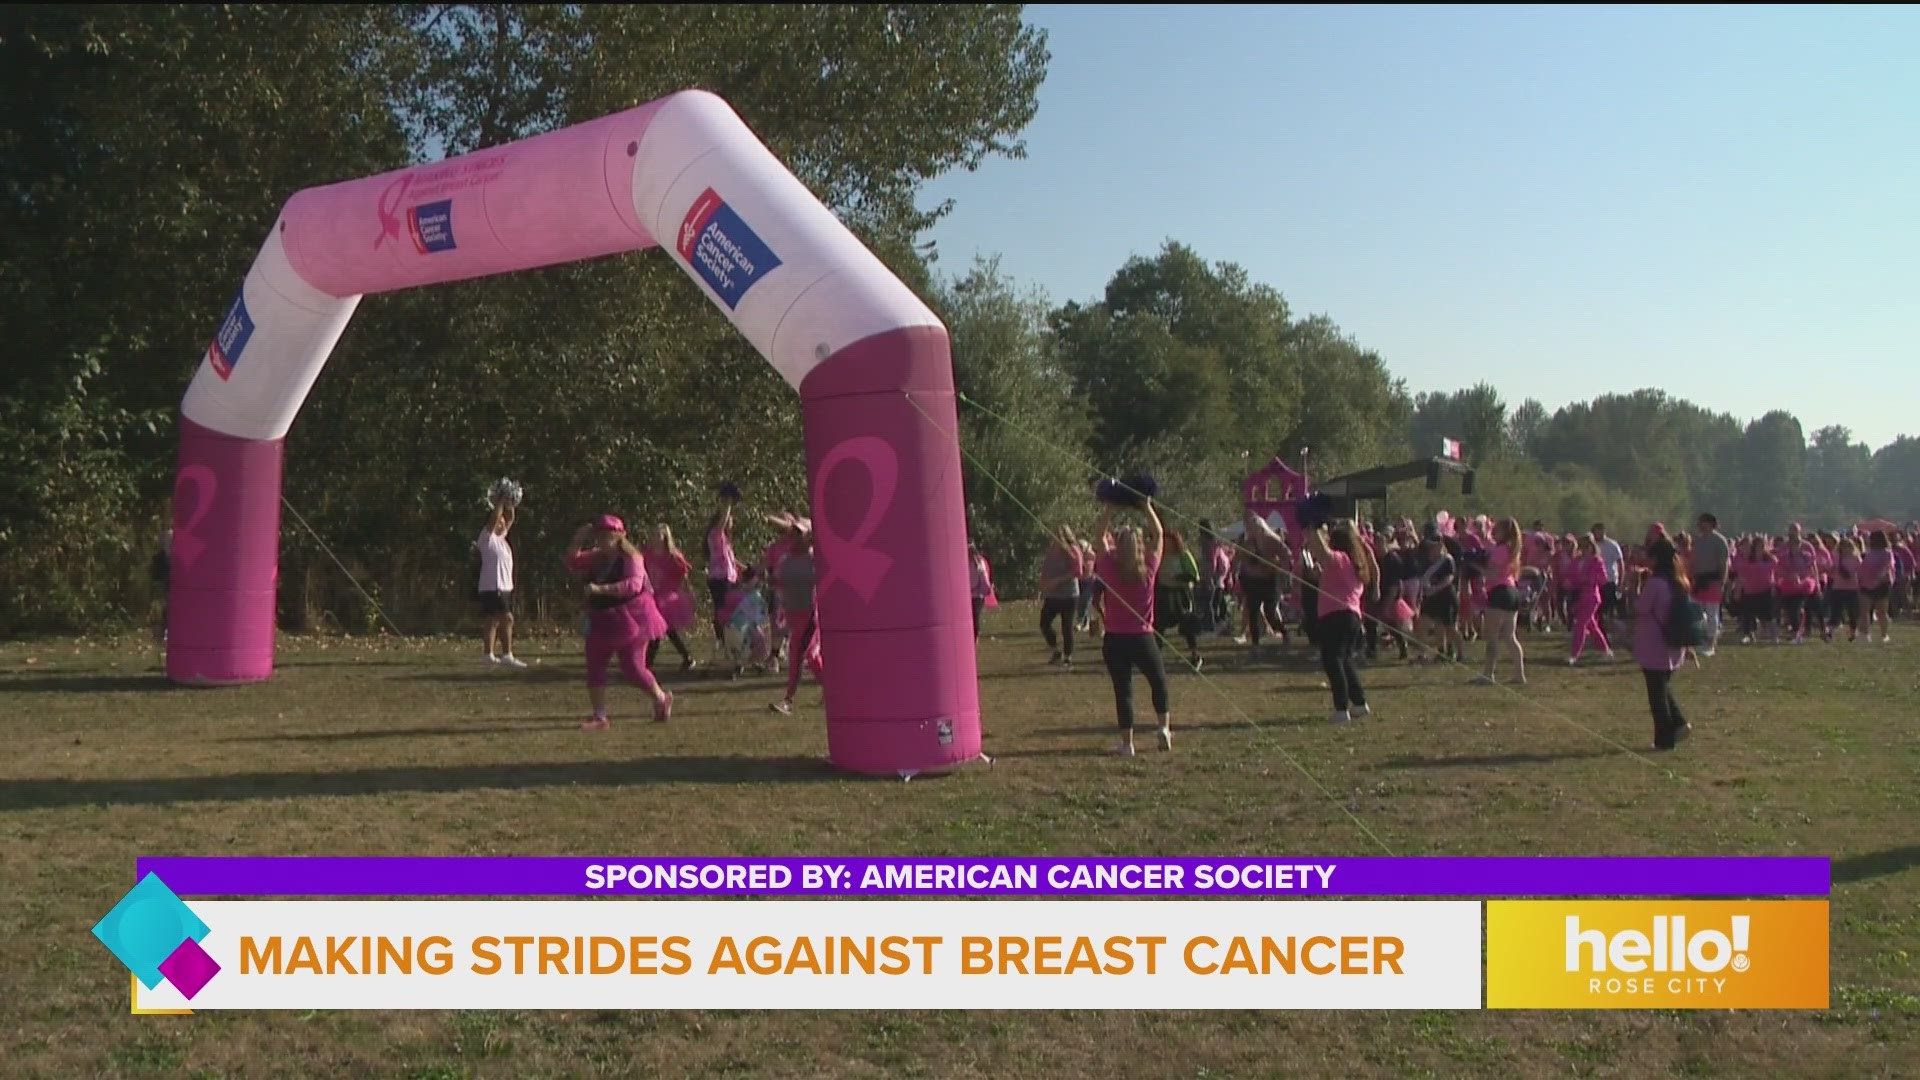 This segment is sponsored by American Cancer Society